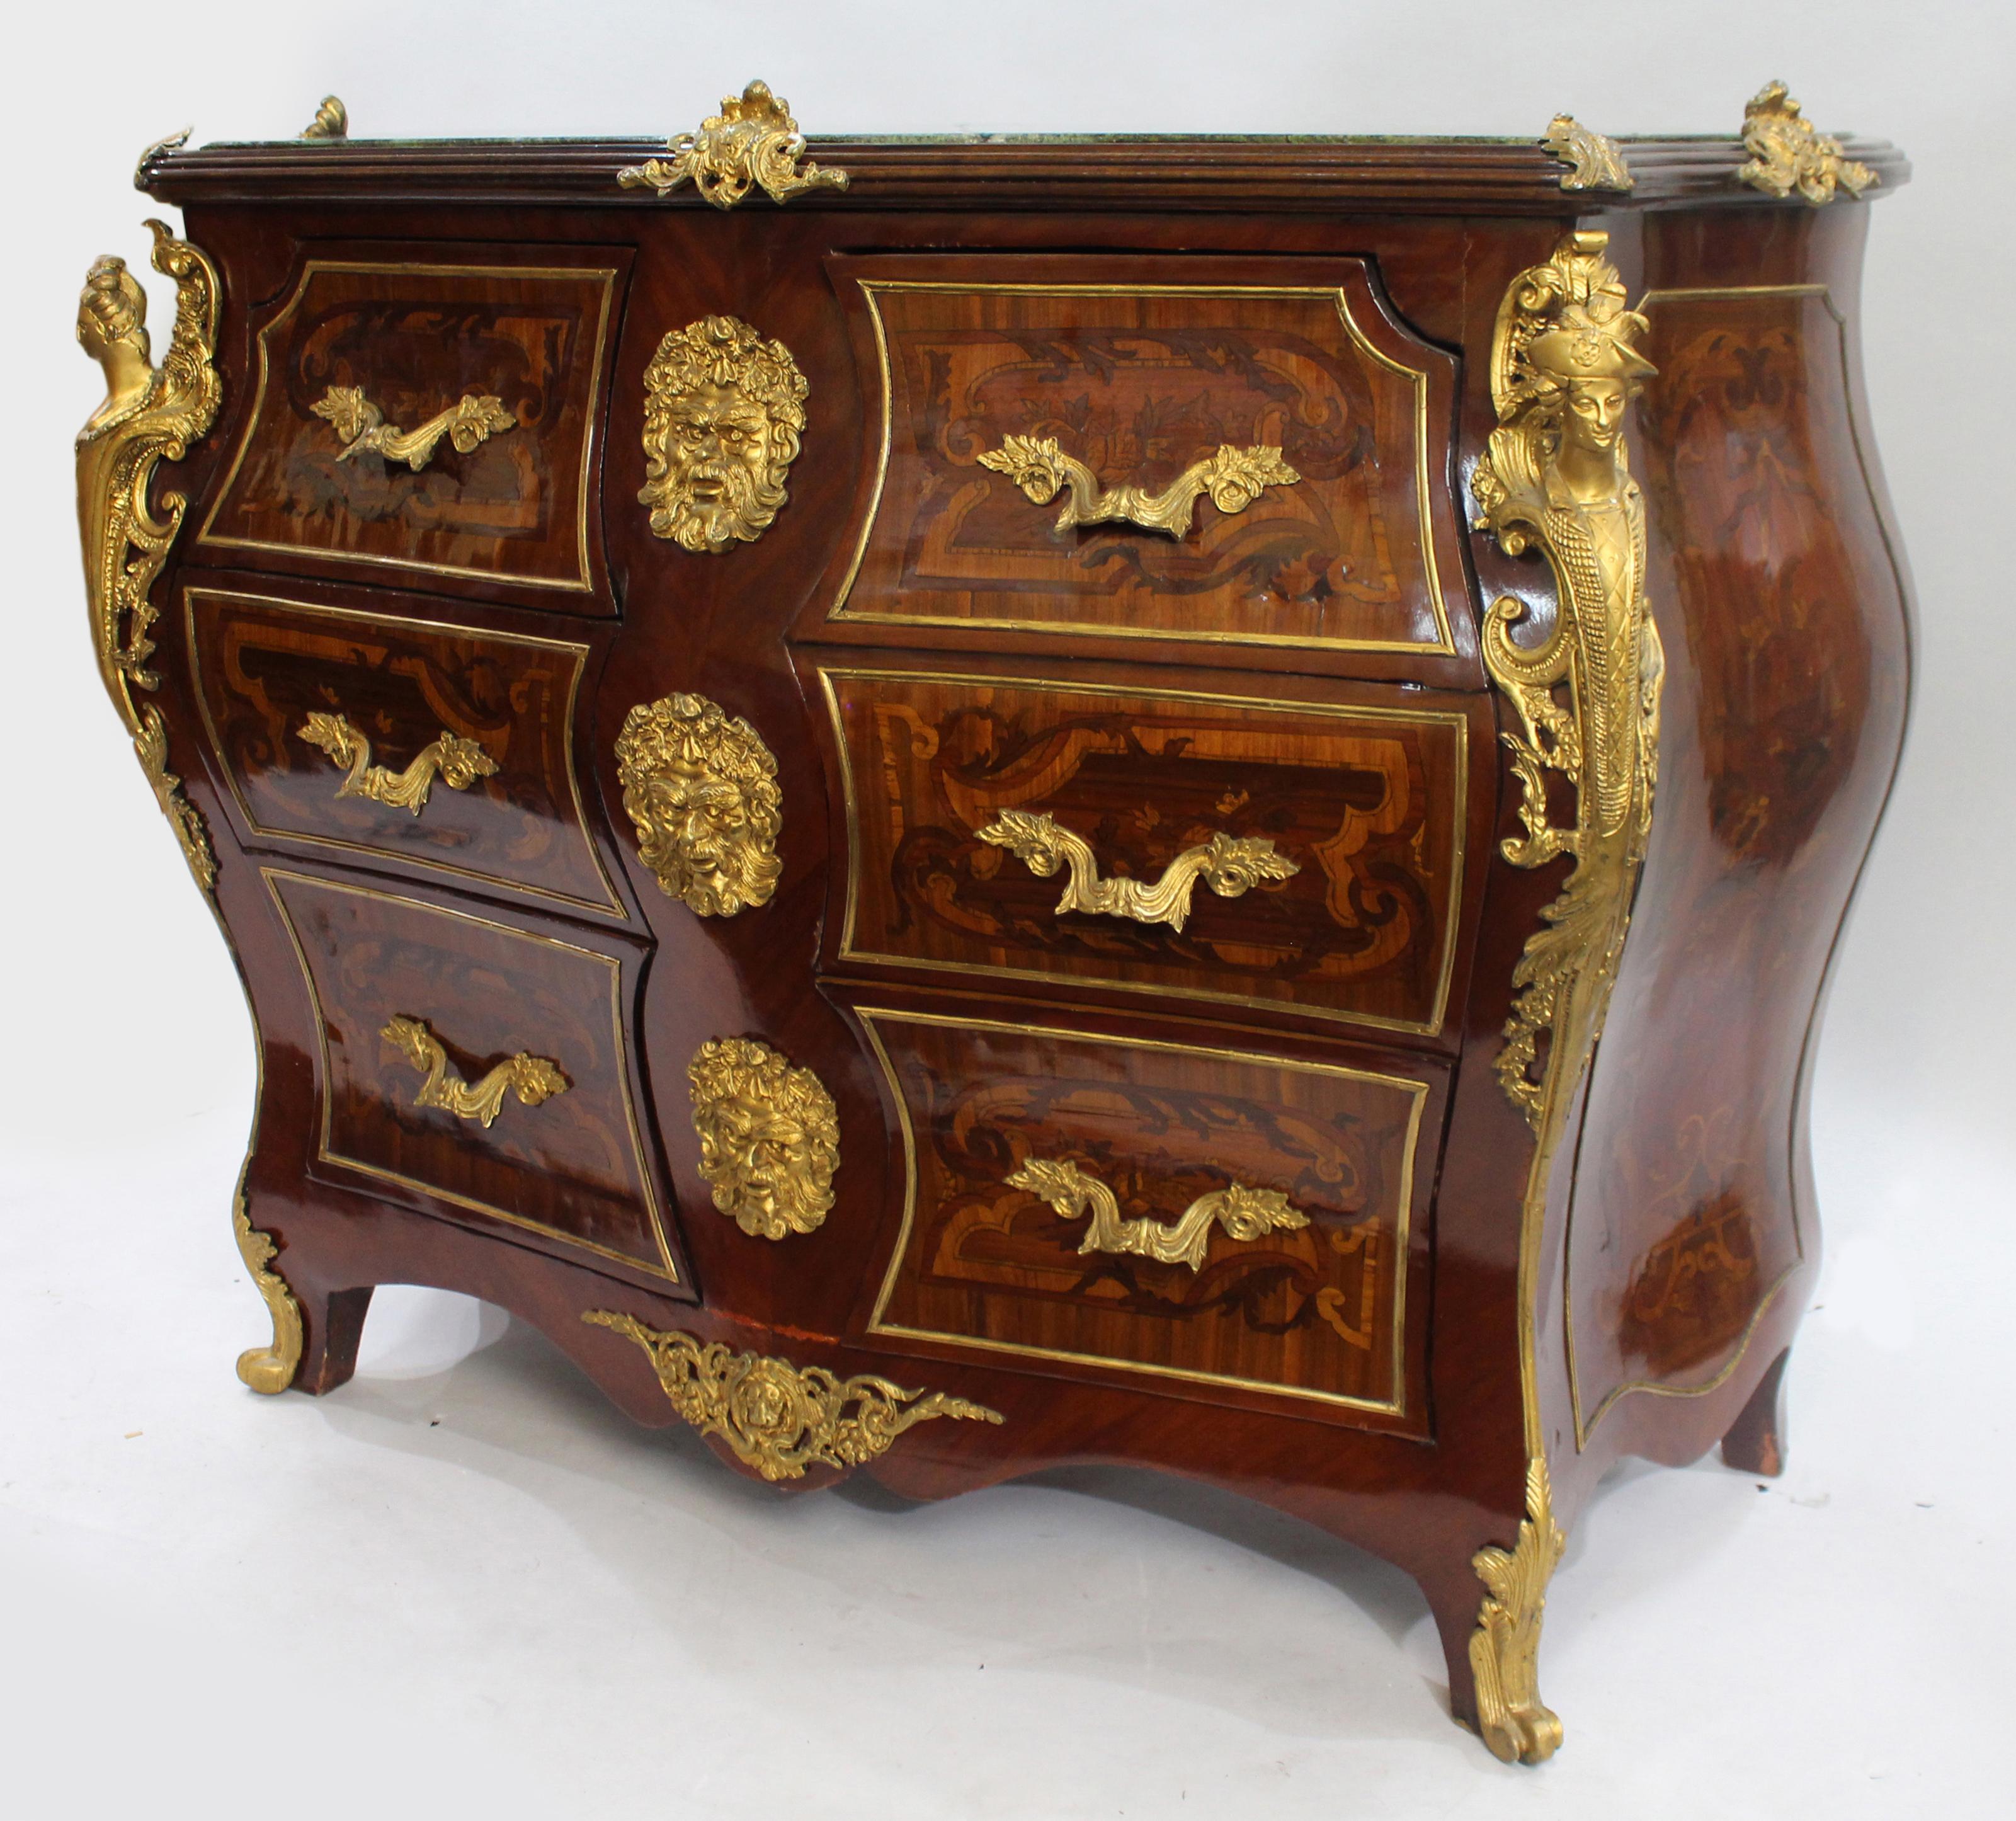 20th Century Louis XV Style Inlaid Marble Topped Bombe Commode